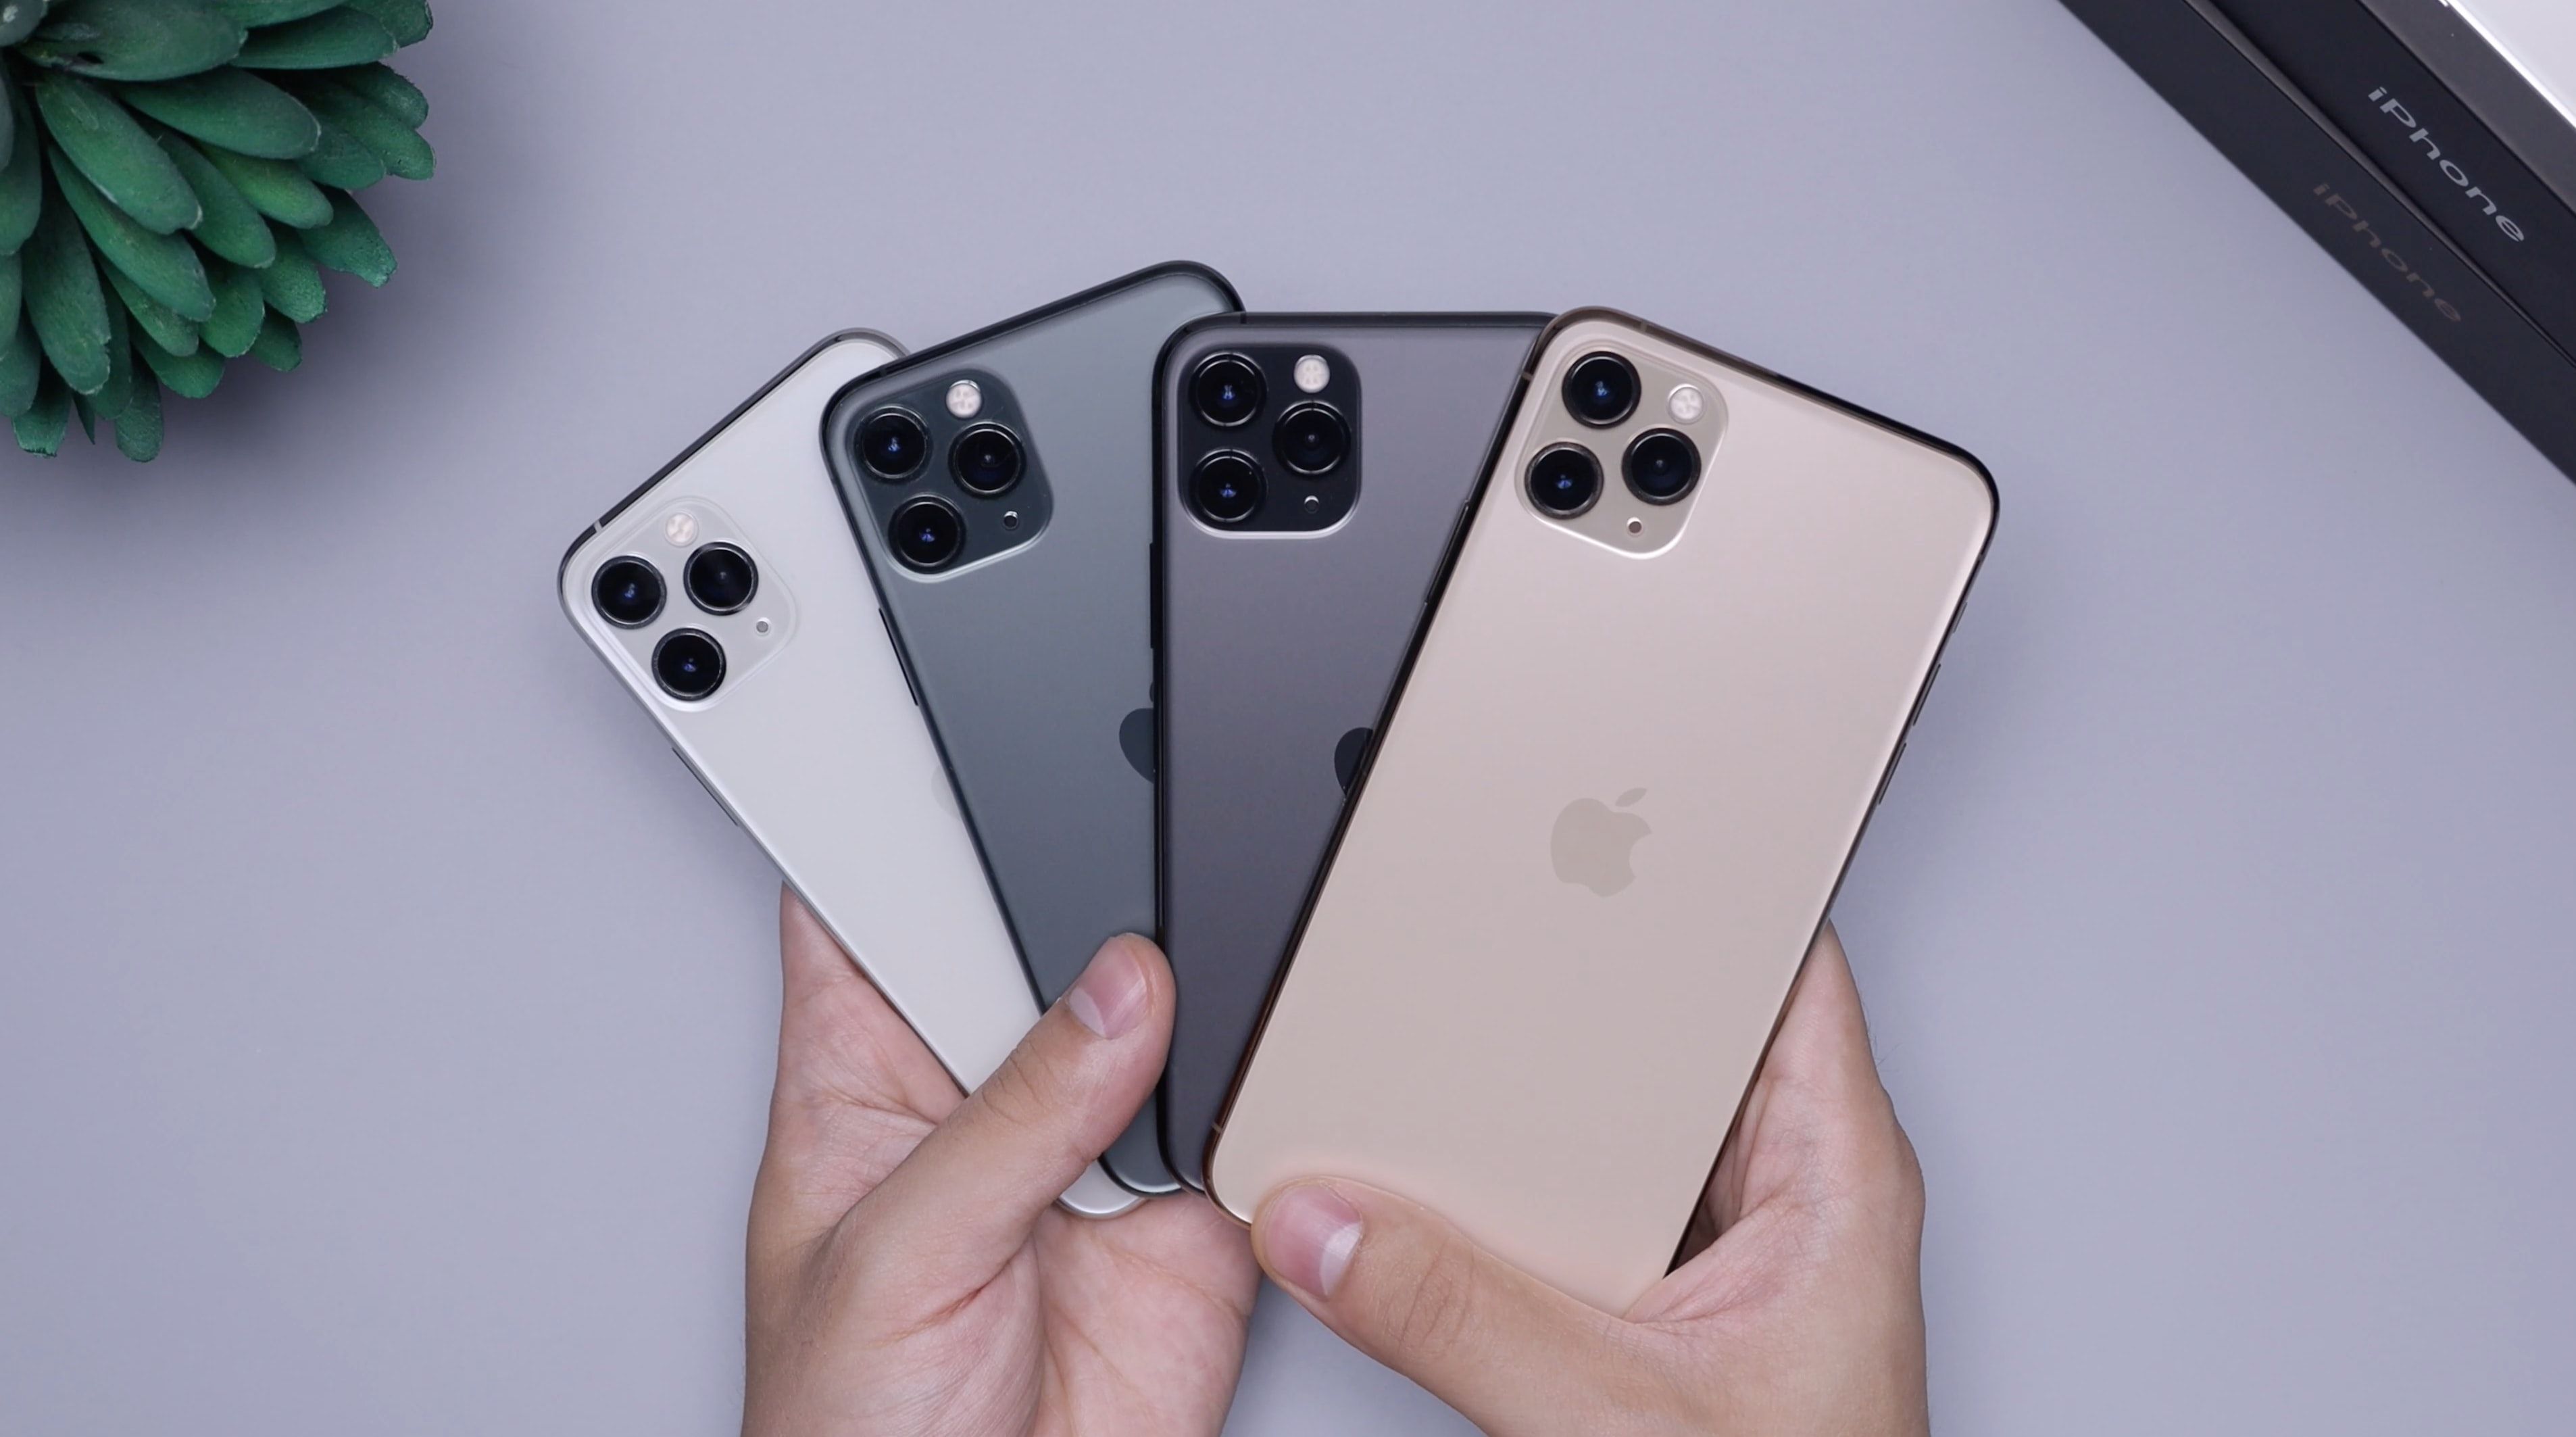 Photo of a person holding numerous iPhone 11 Pro devices